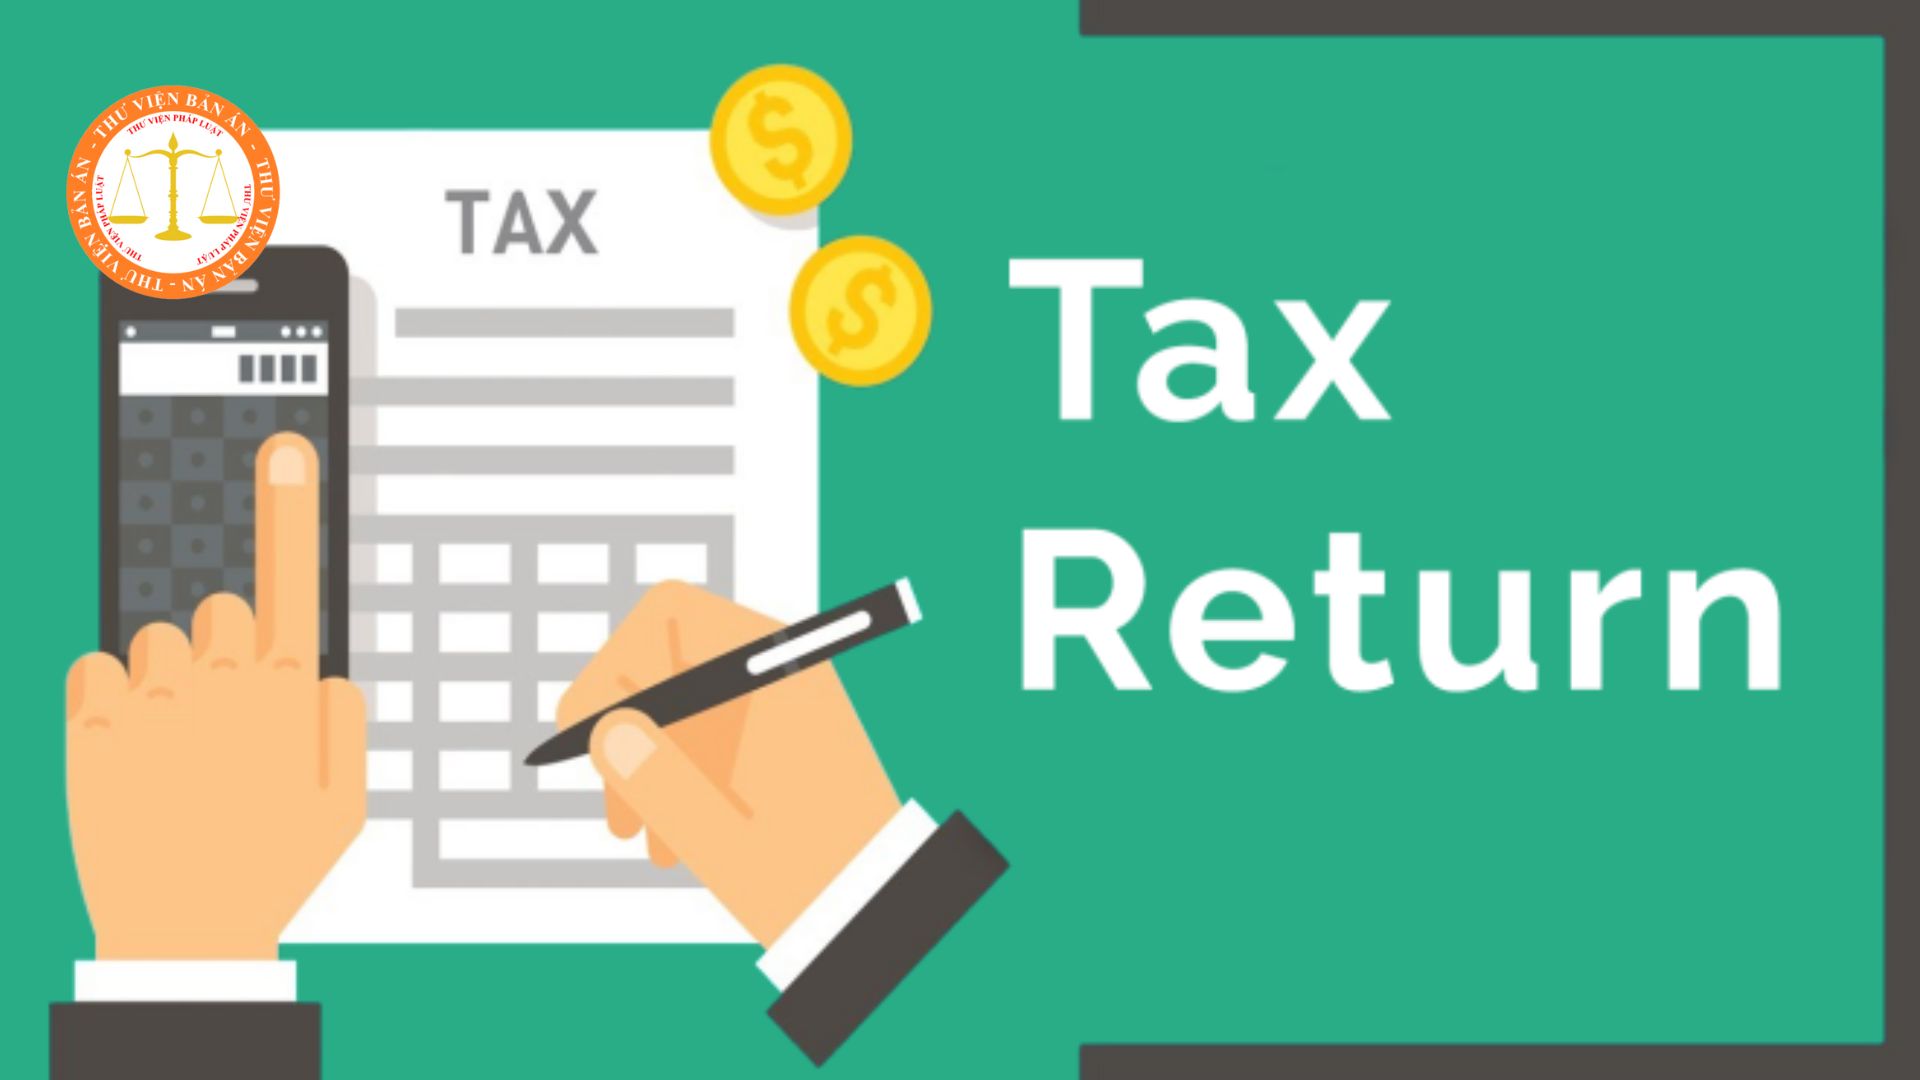 Instructions for VAT refunds for investment projects for business establishments in Vietnam